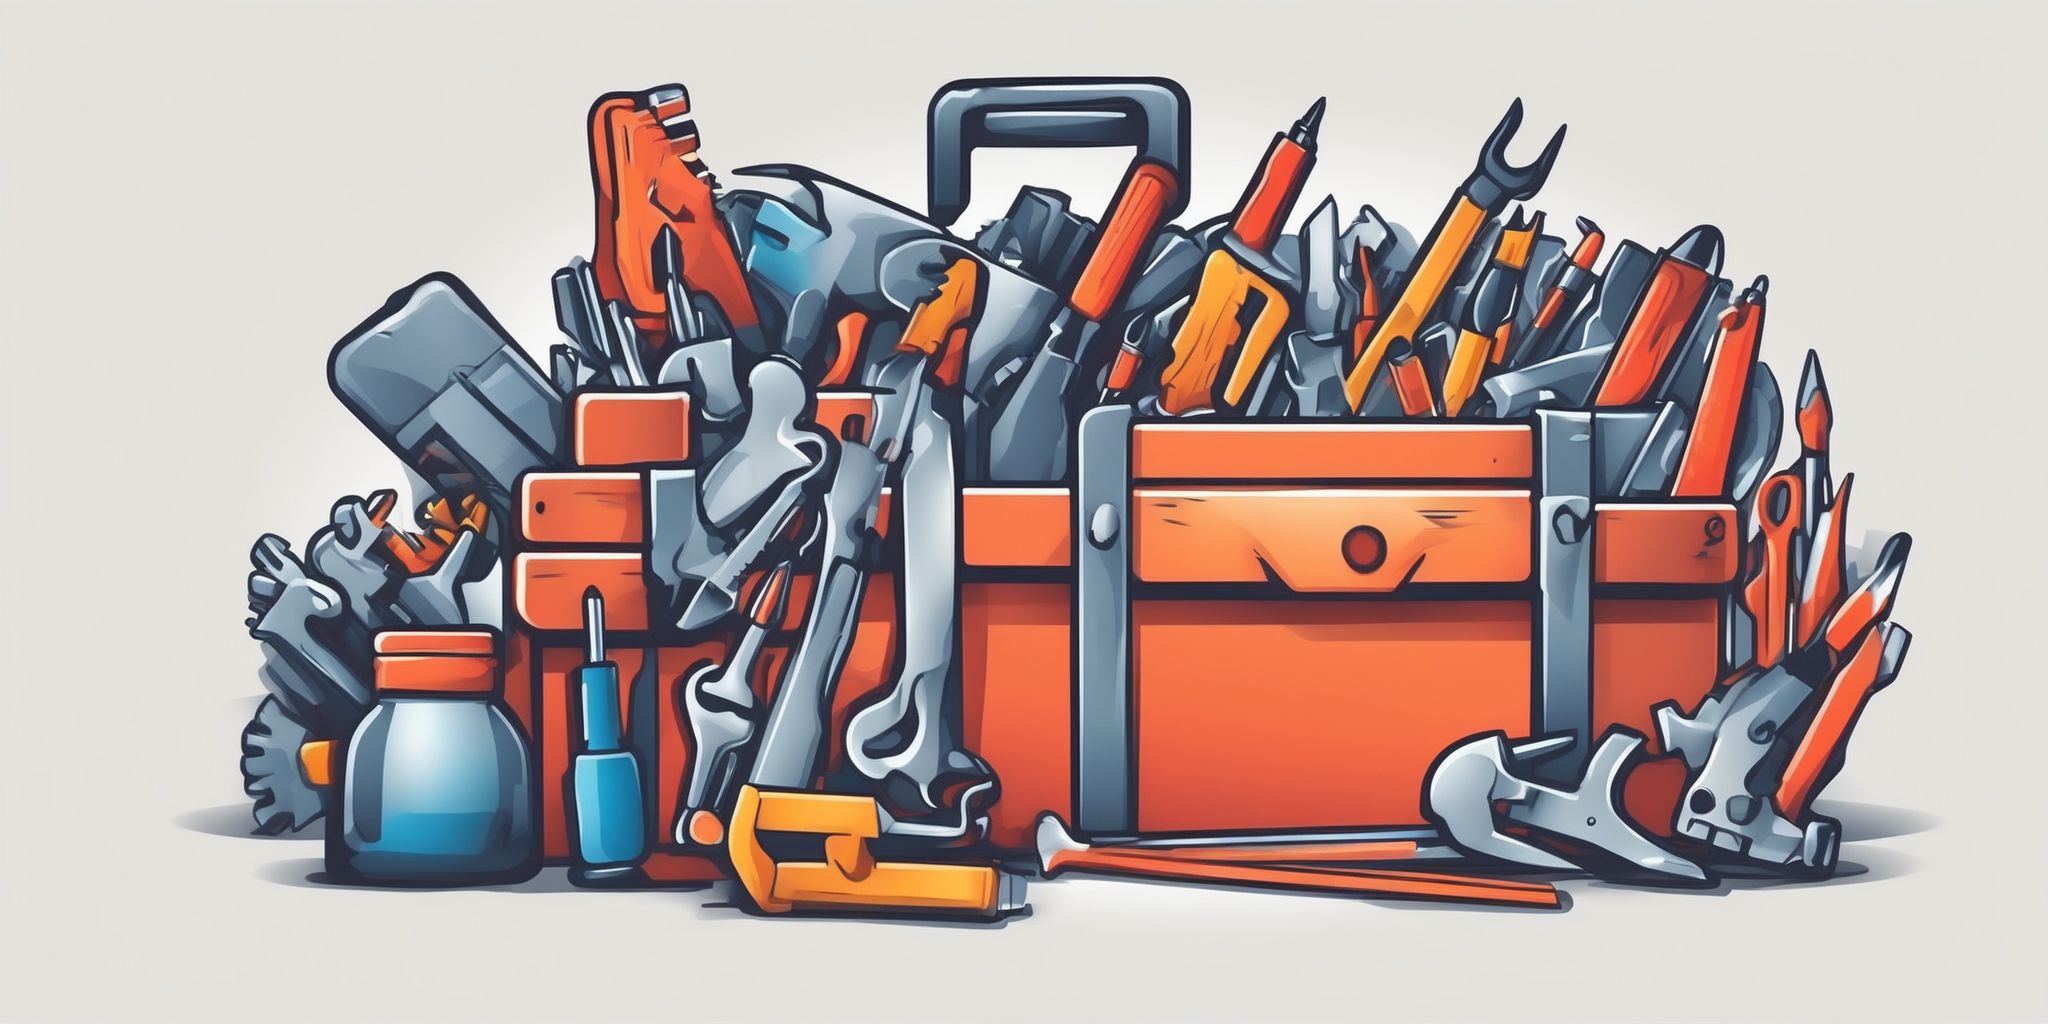 Marketing: Toolbox in illustration style with gradients and white background